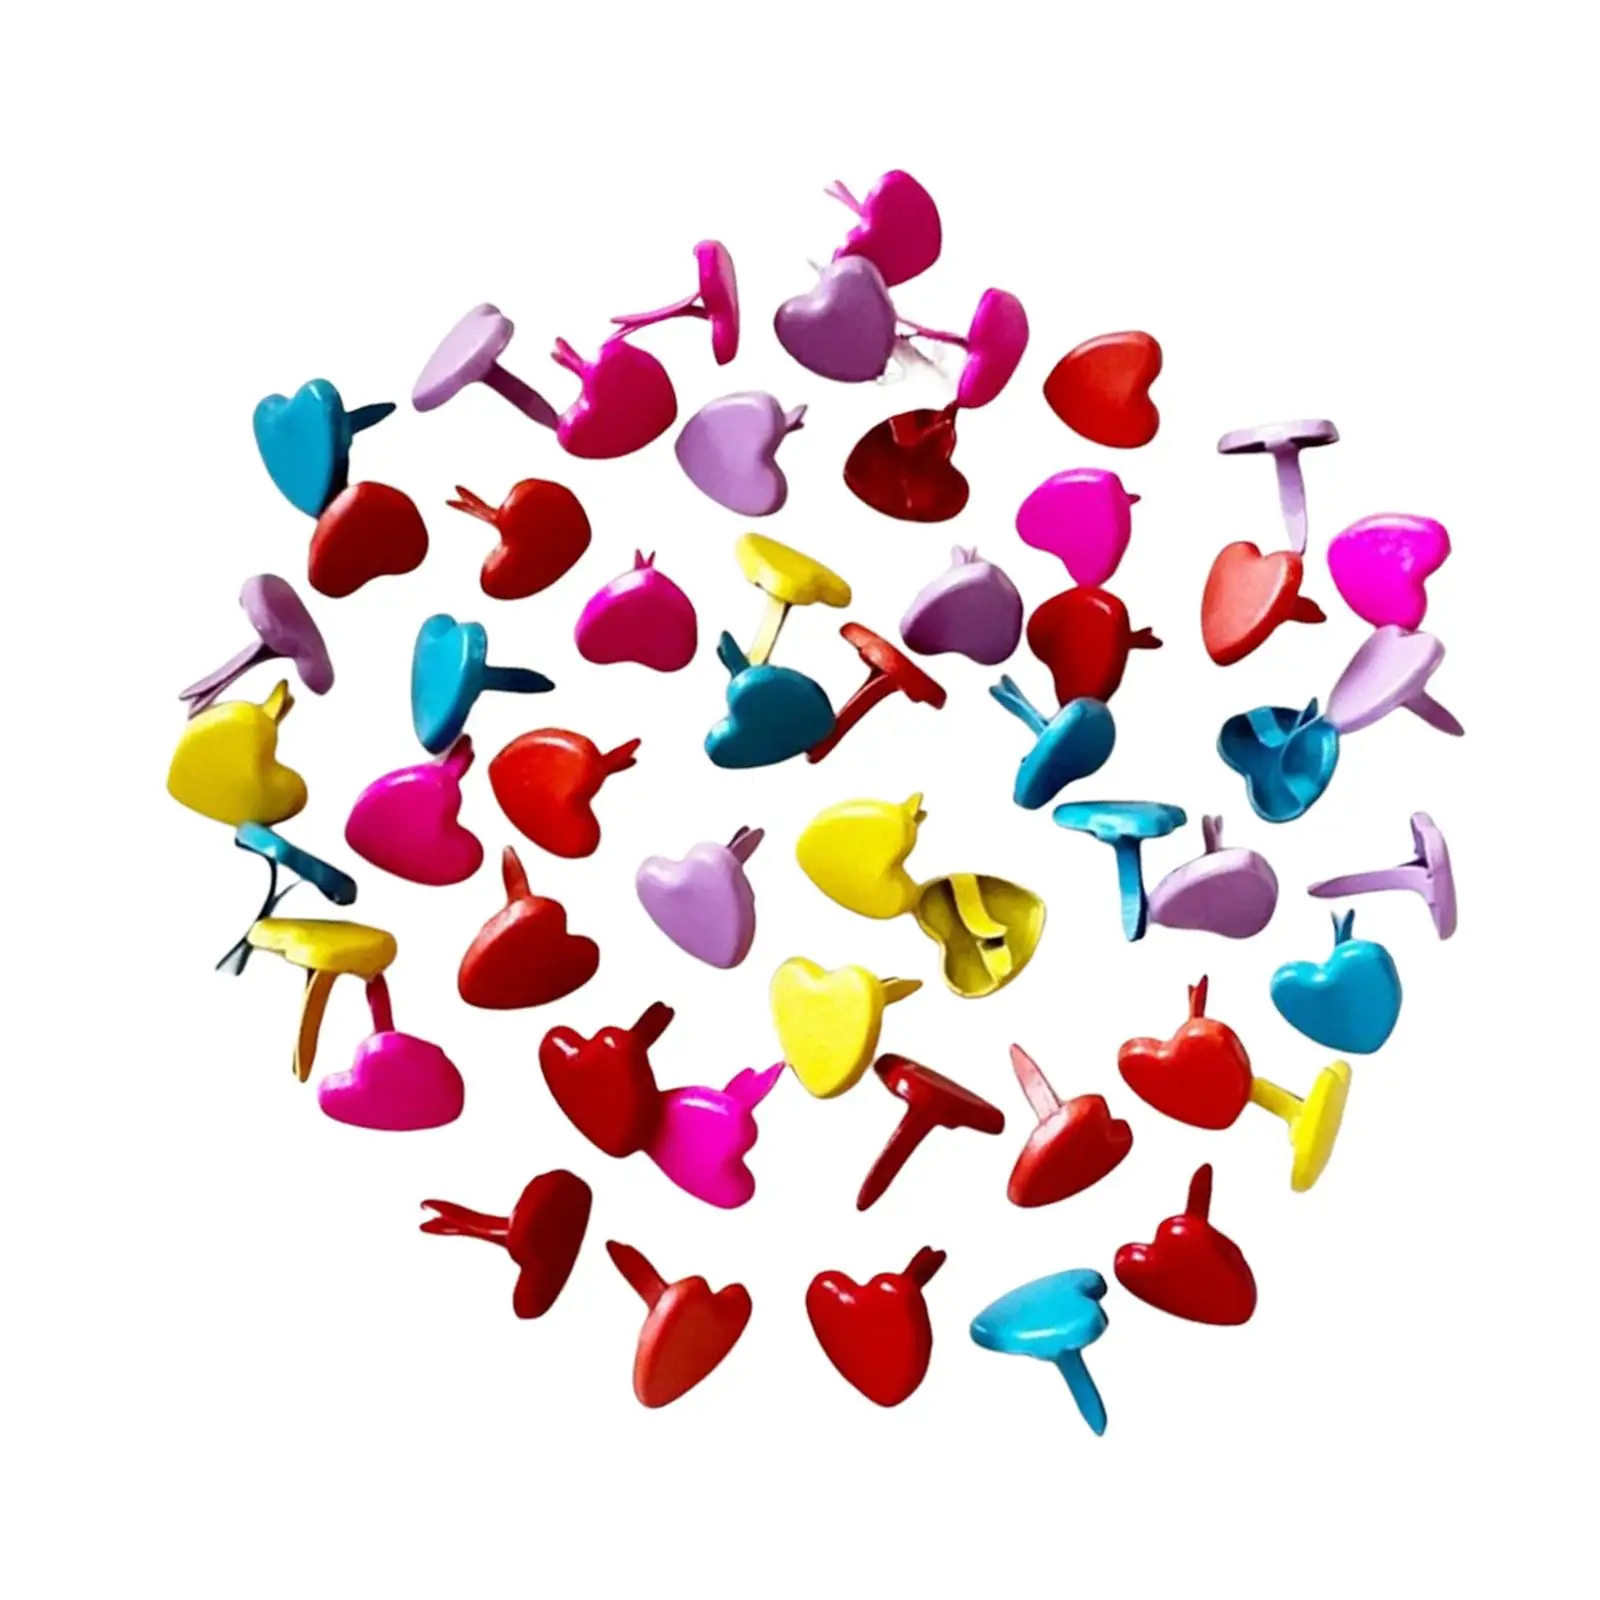 200 Pieces Small Metal Heart Brads Paper Fasteners Multicolor for Art Scrapbooking Crafting Wide Application Durable Split Pins